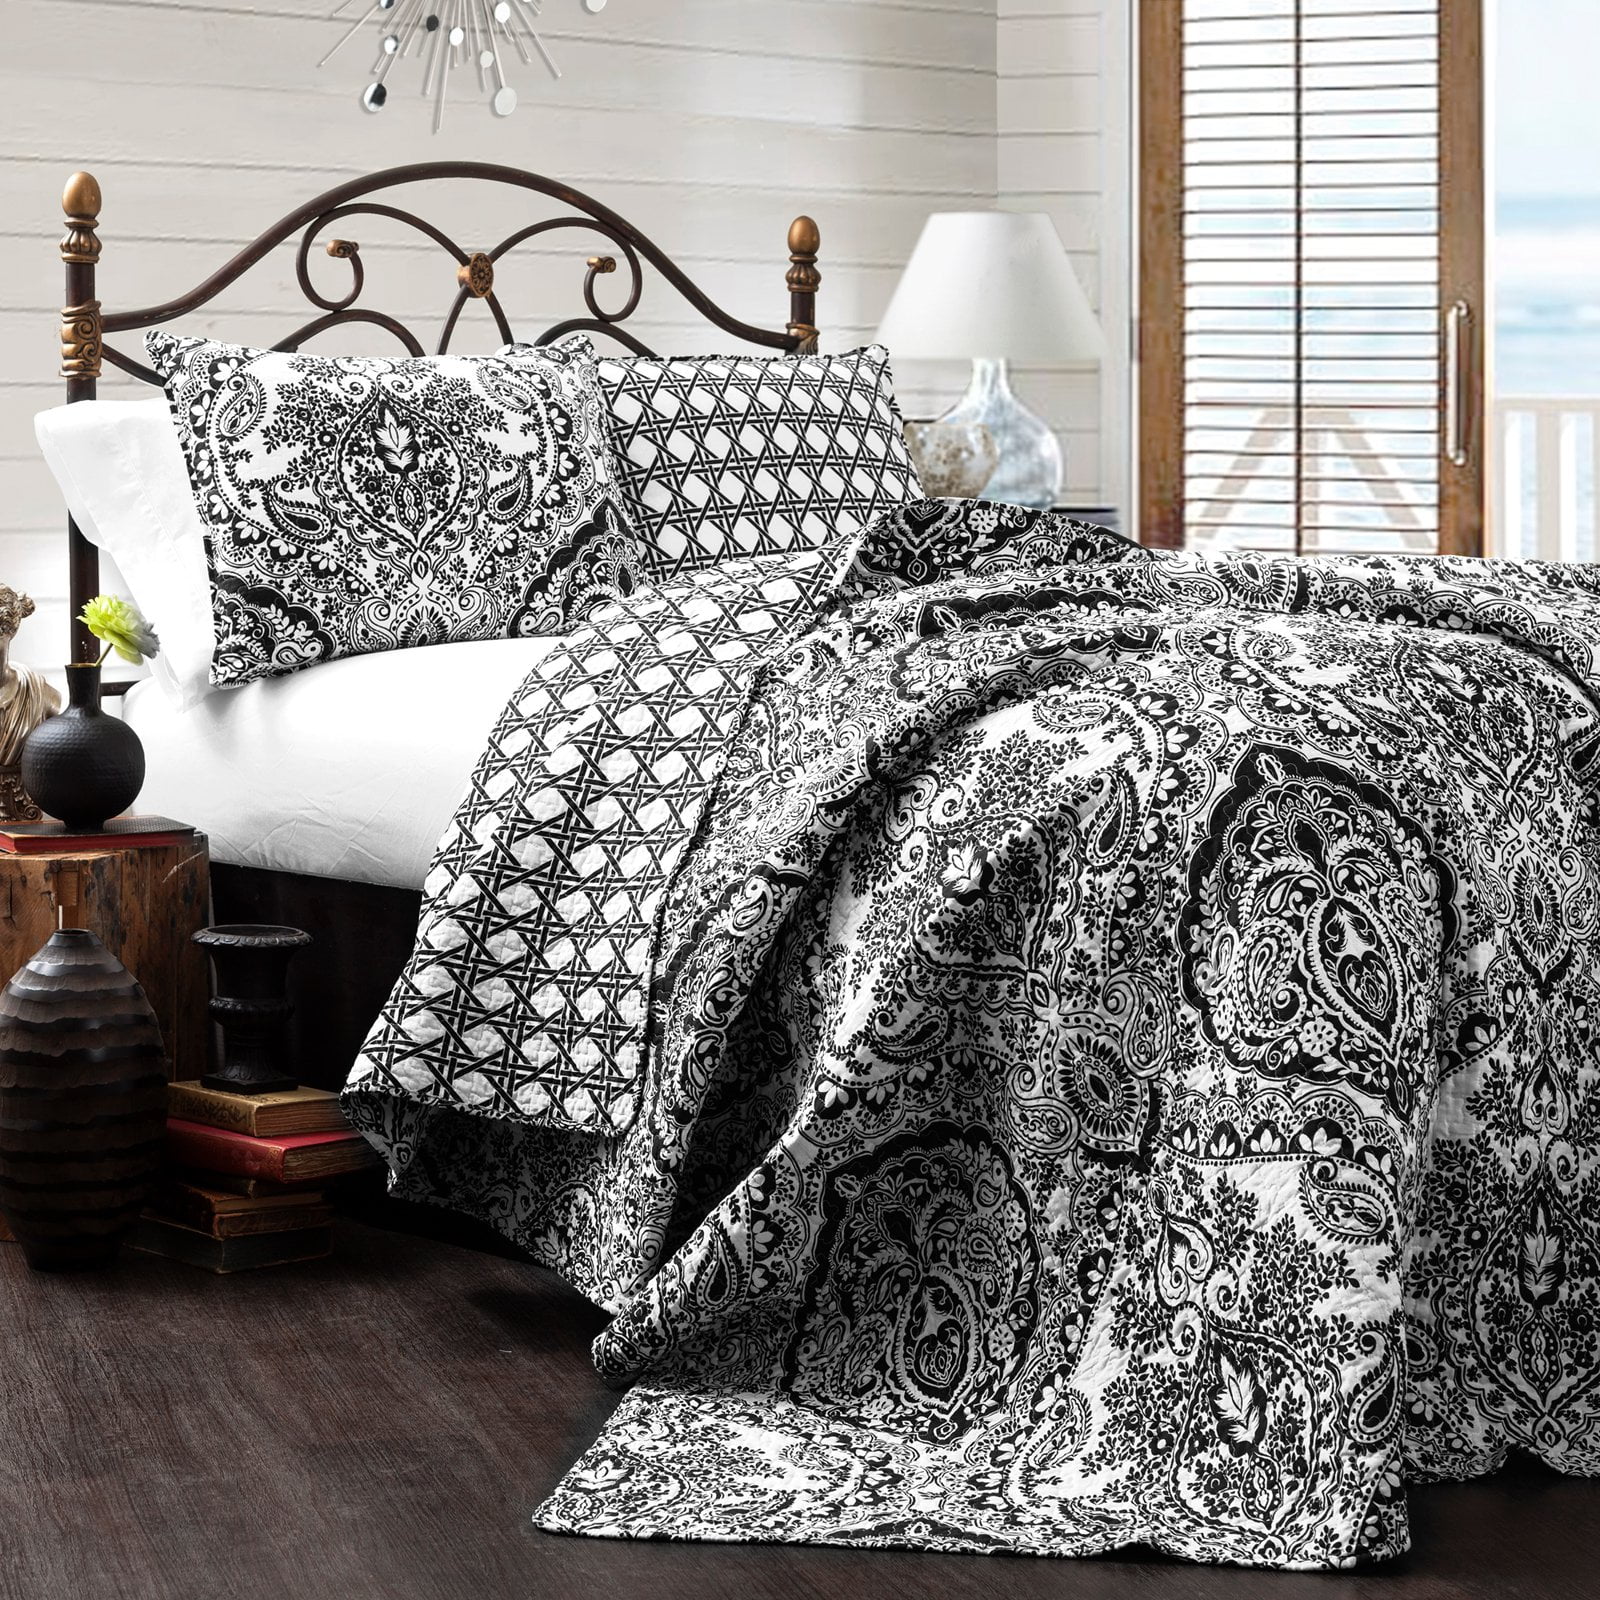 Horse and Lady Print Details about   Black and White Quilted Bedspread & Pillow Shams Set 